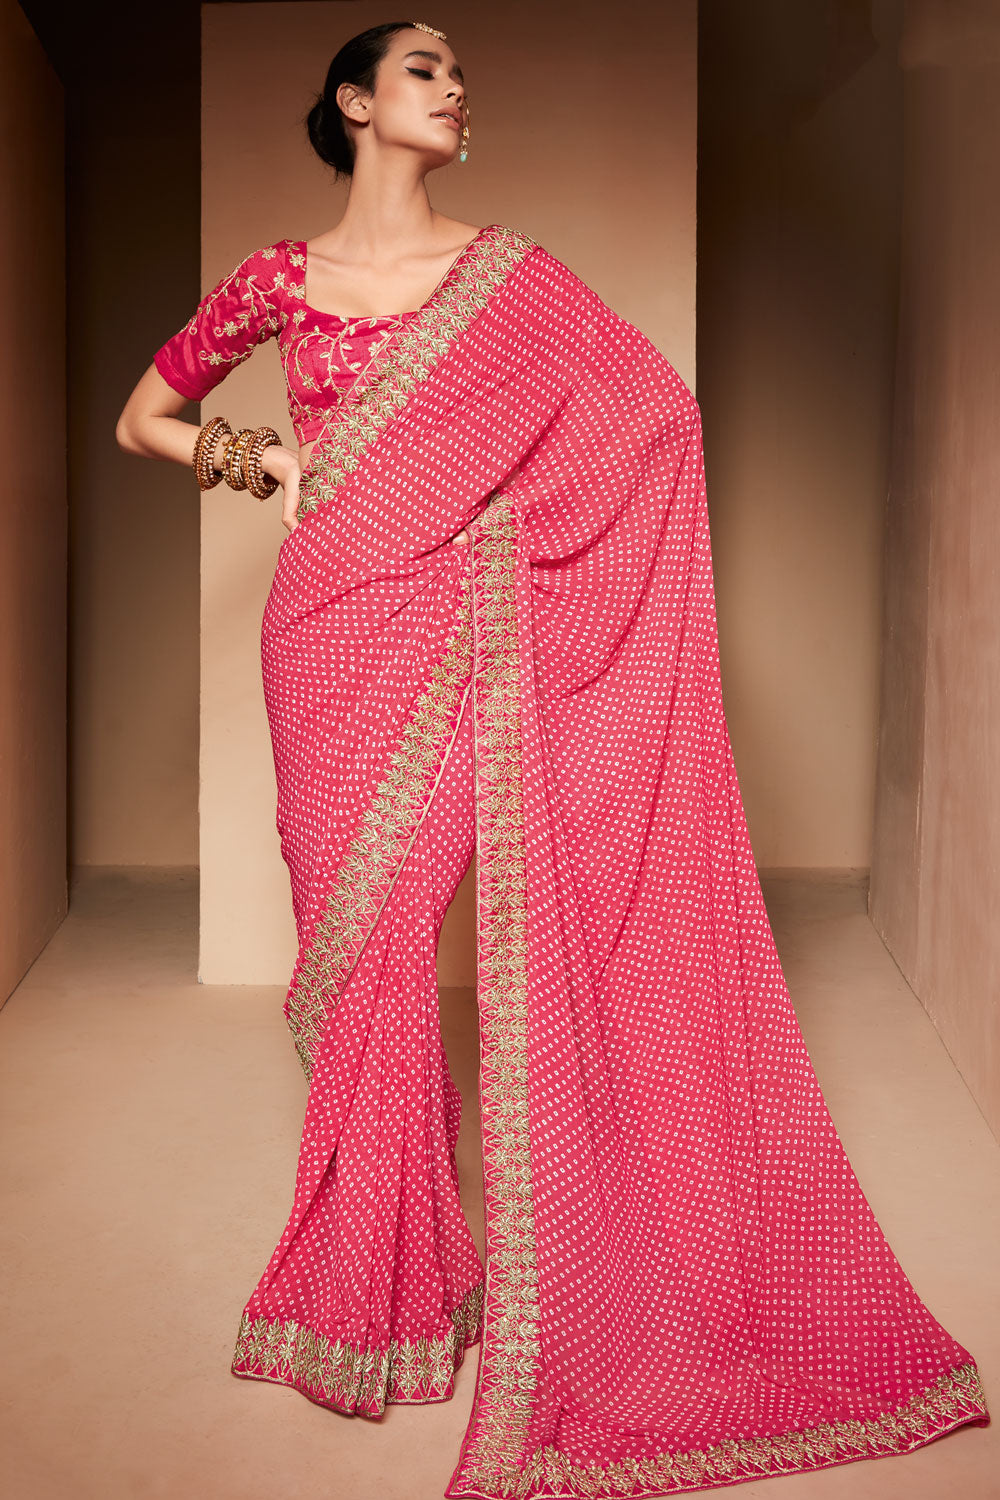 Punch Pink Bandhani Georgette Saree With Embroidery Lace Border